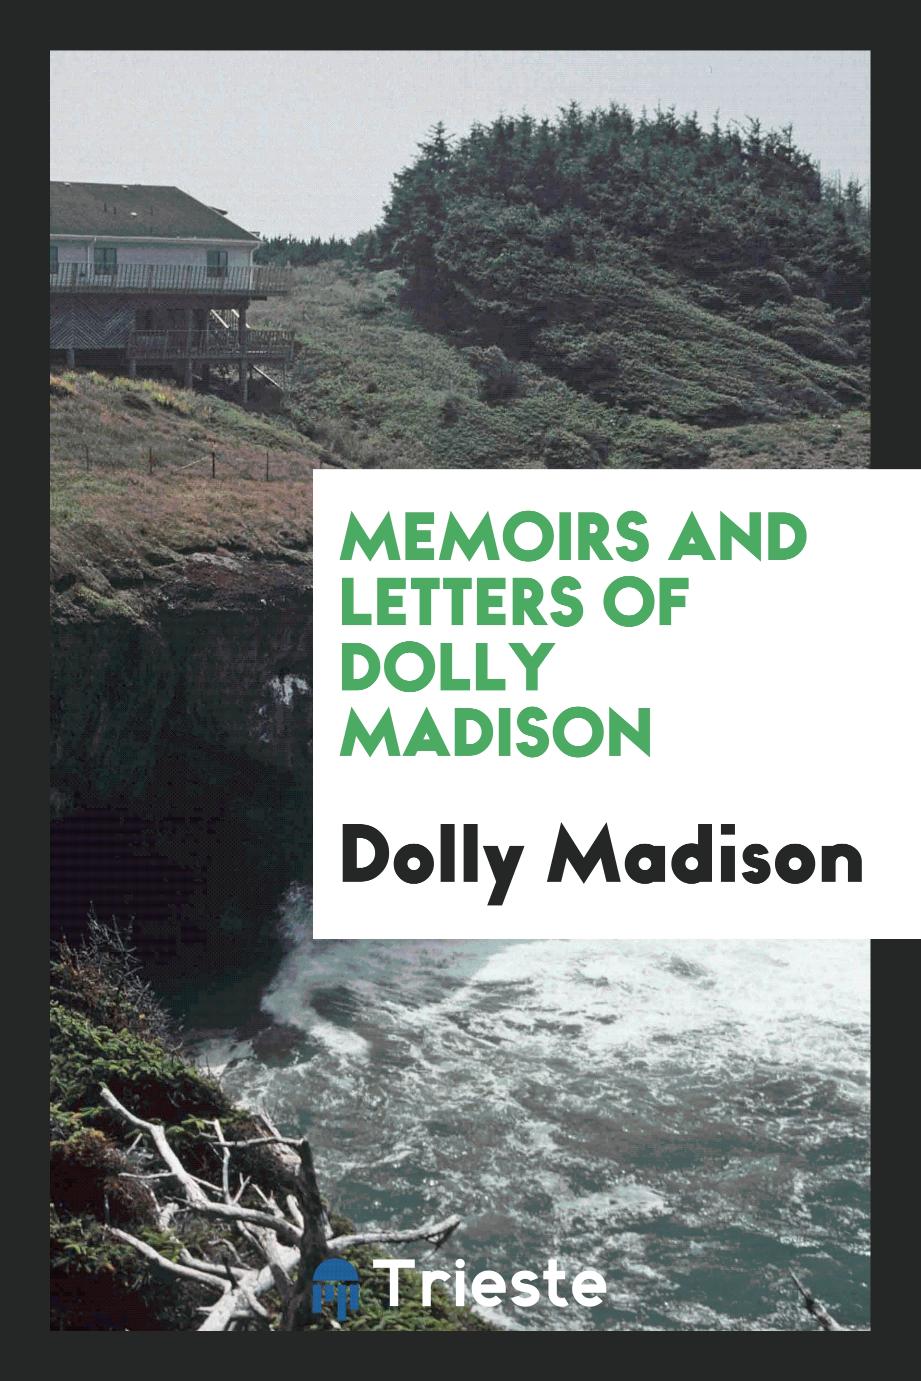 Dolly Madison - Memoirs and letters of Dolly Madison